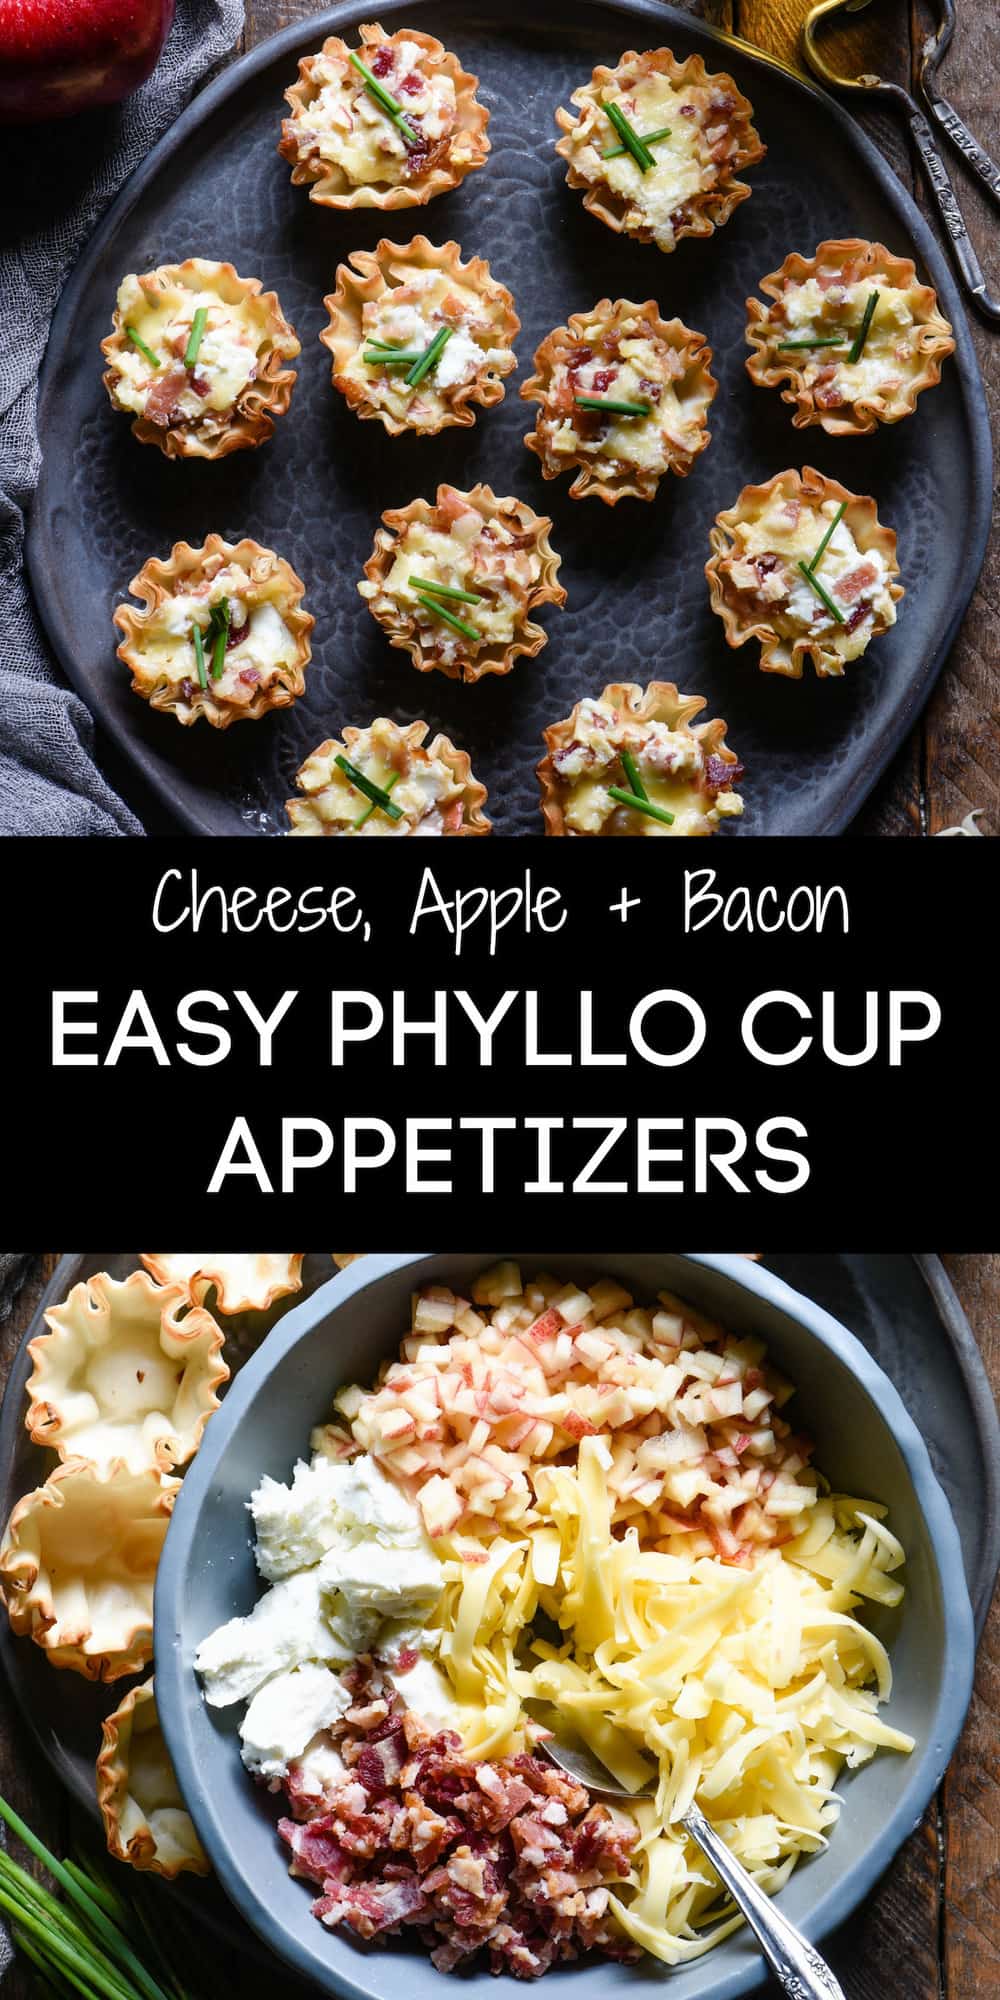 Collage of ingredients and finished recipe photos with overlay: Cheese, Apple + Bacon EASY PHYLLO CUP APPETIZERS